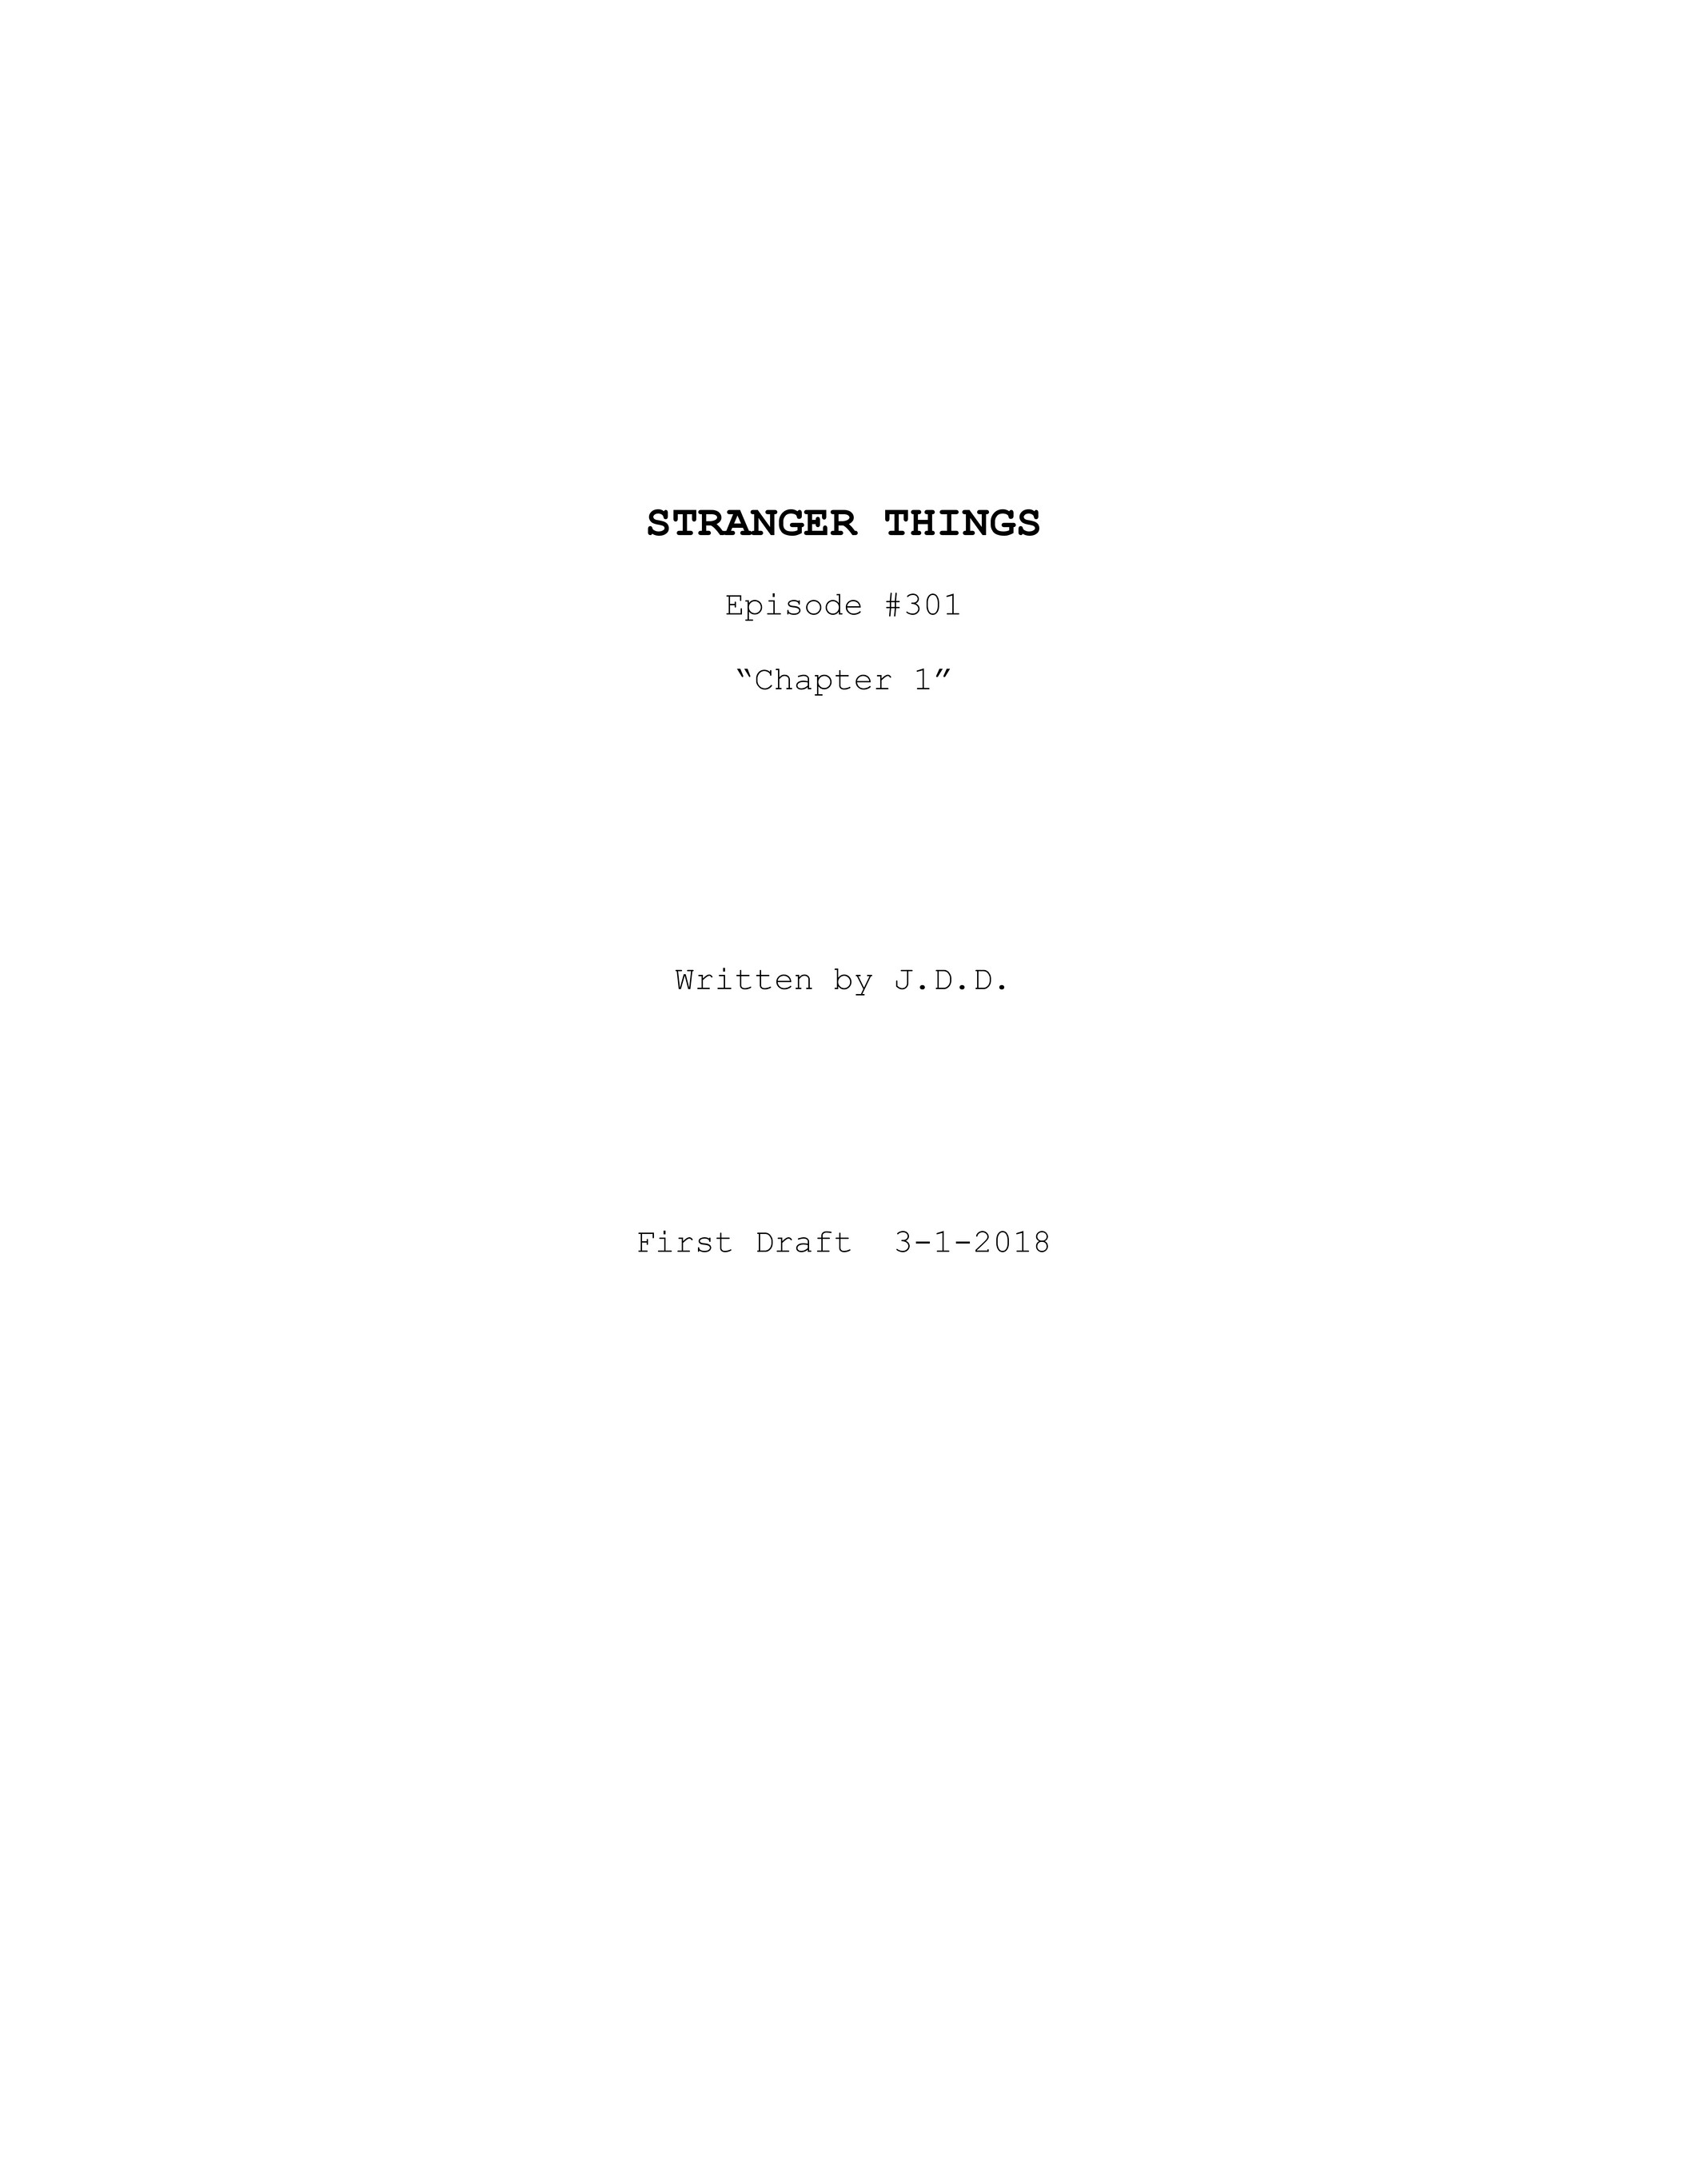 Stranger Things Season 5 Episode 1 Title and First Few Lines